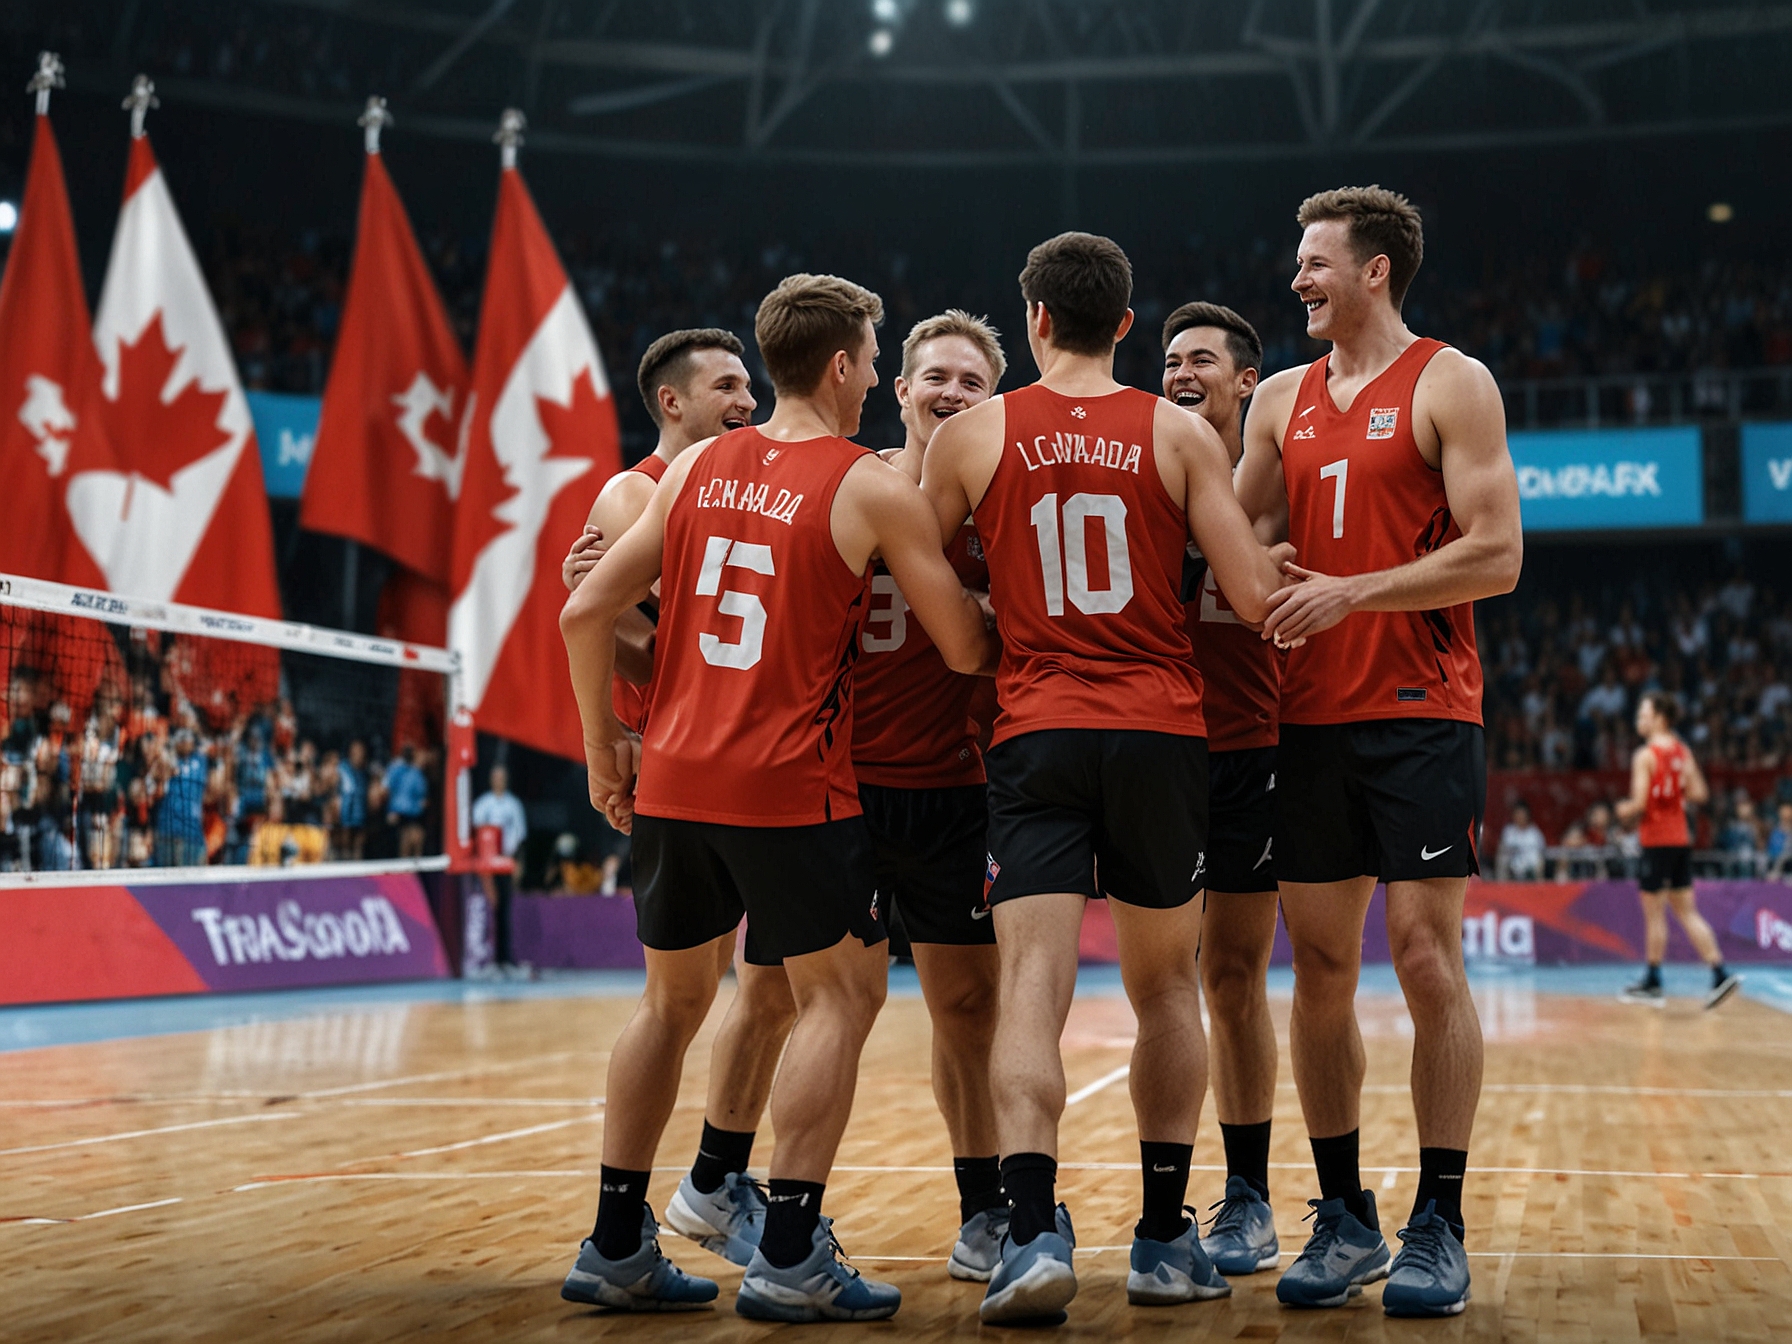 Team Canada celebrates after winning the Manila Leg of the VNL 2024, with star players Stephen Maar and Eric Loeppky leading the charge, showcasing their teamwork and determination on the court.